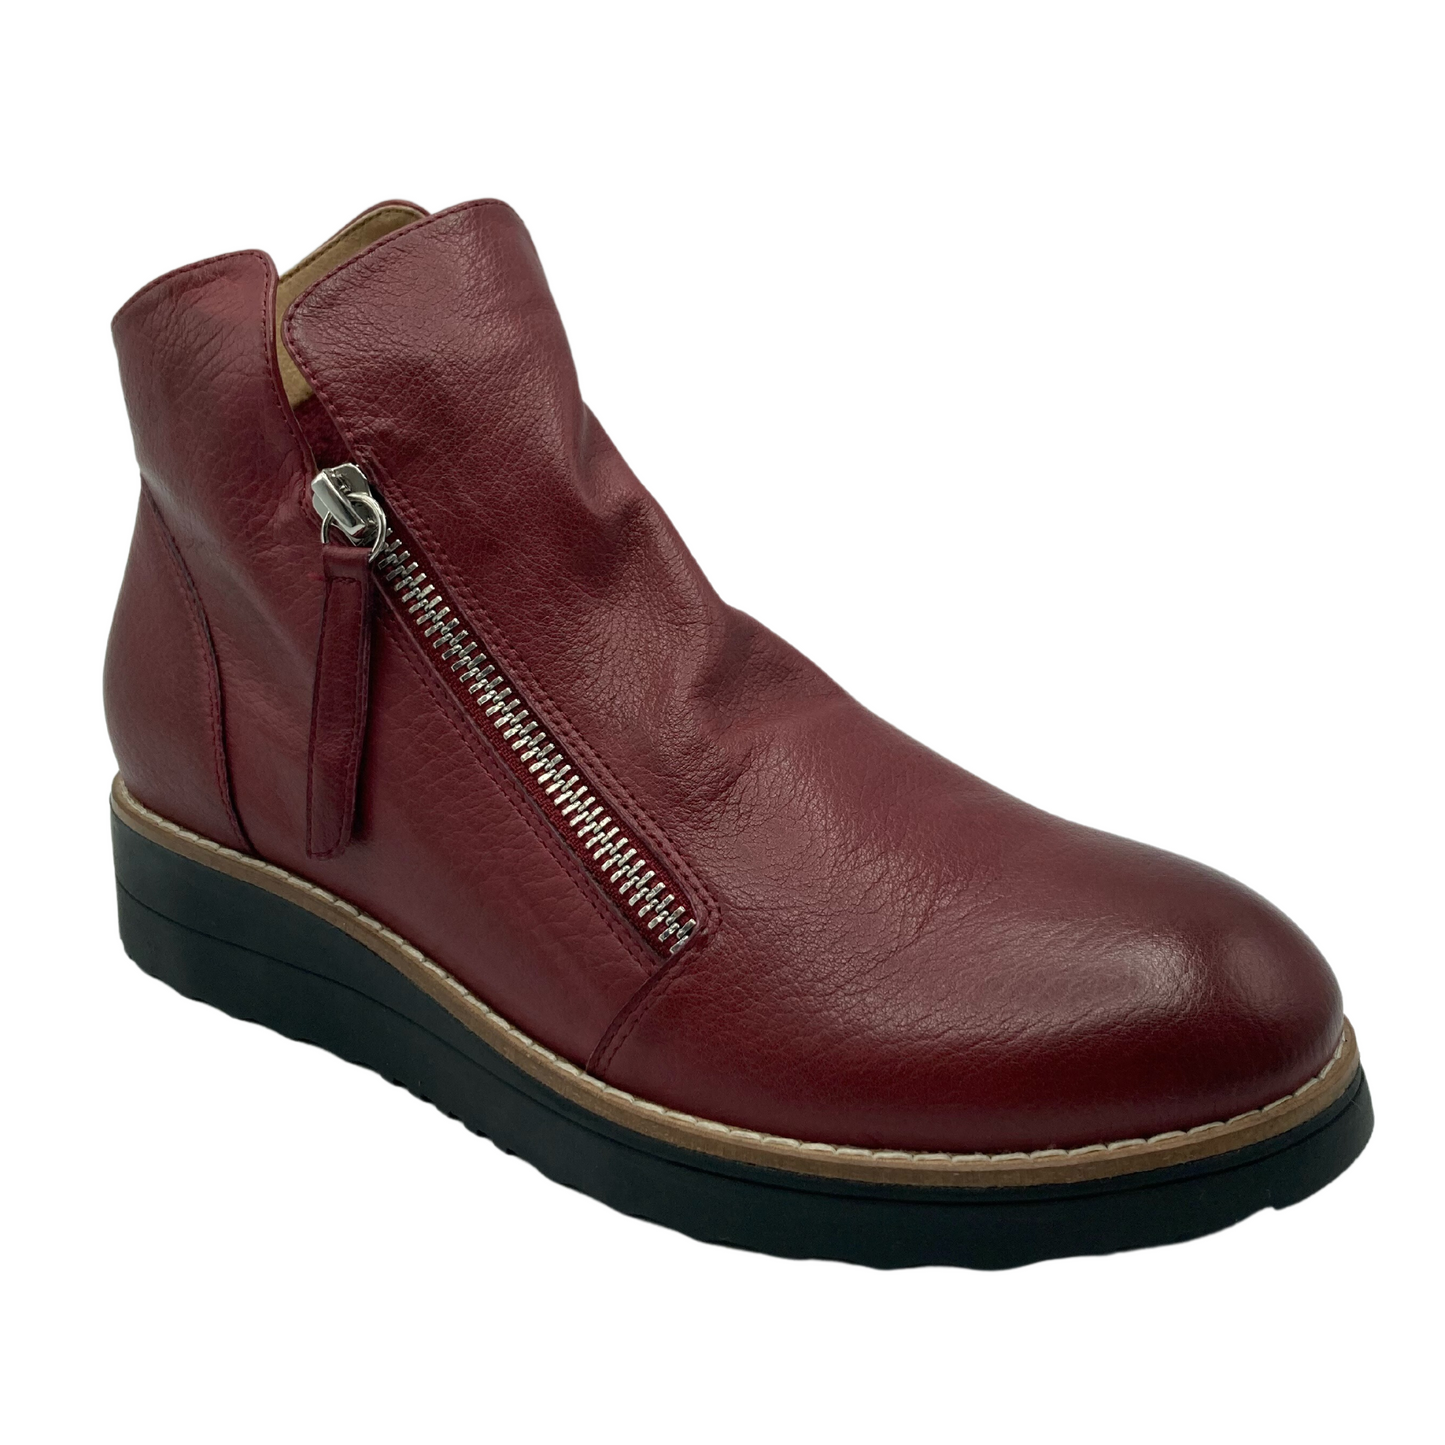 45 degree angled view of short pinot red coloured leather boot with black rubber sole